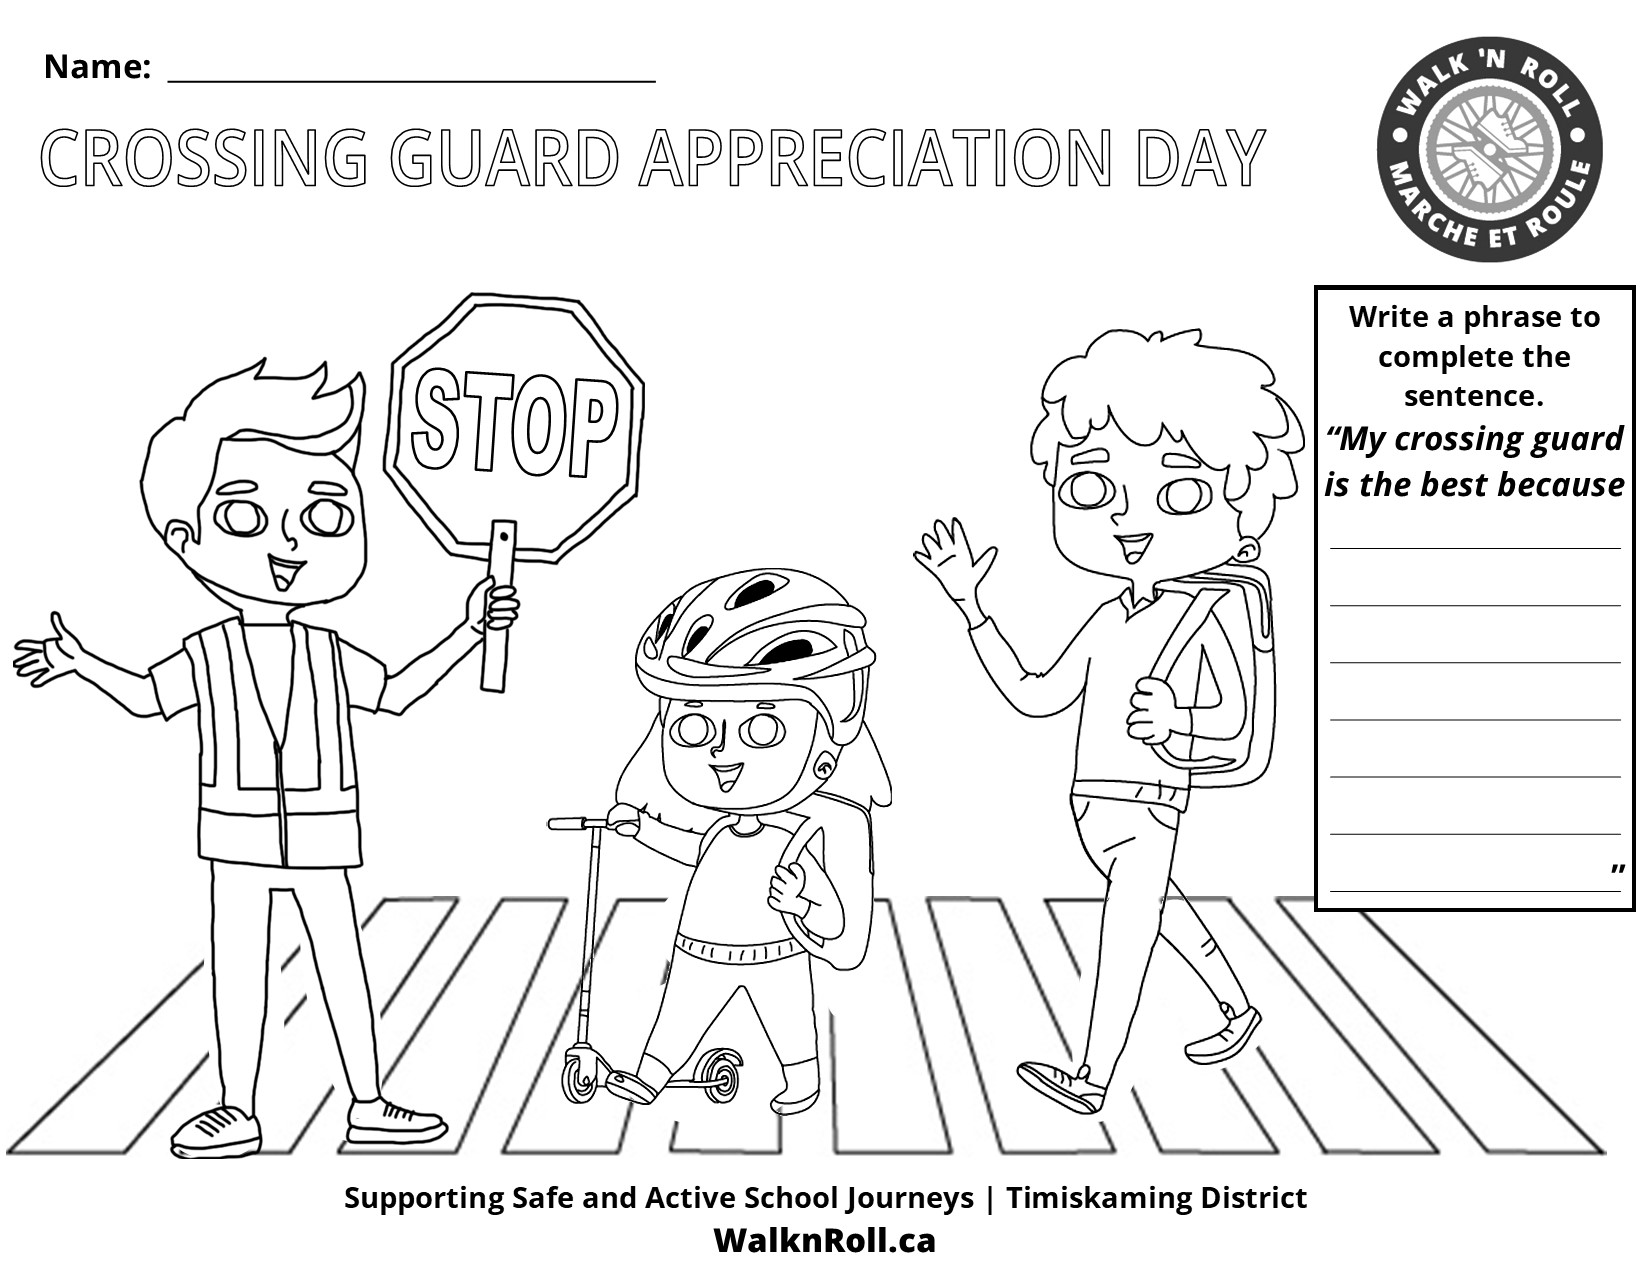 Colouring page - Crossing Guard